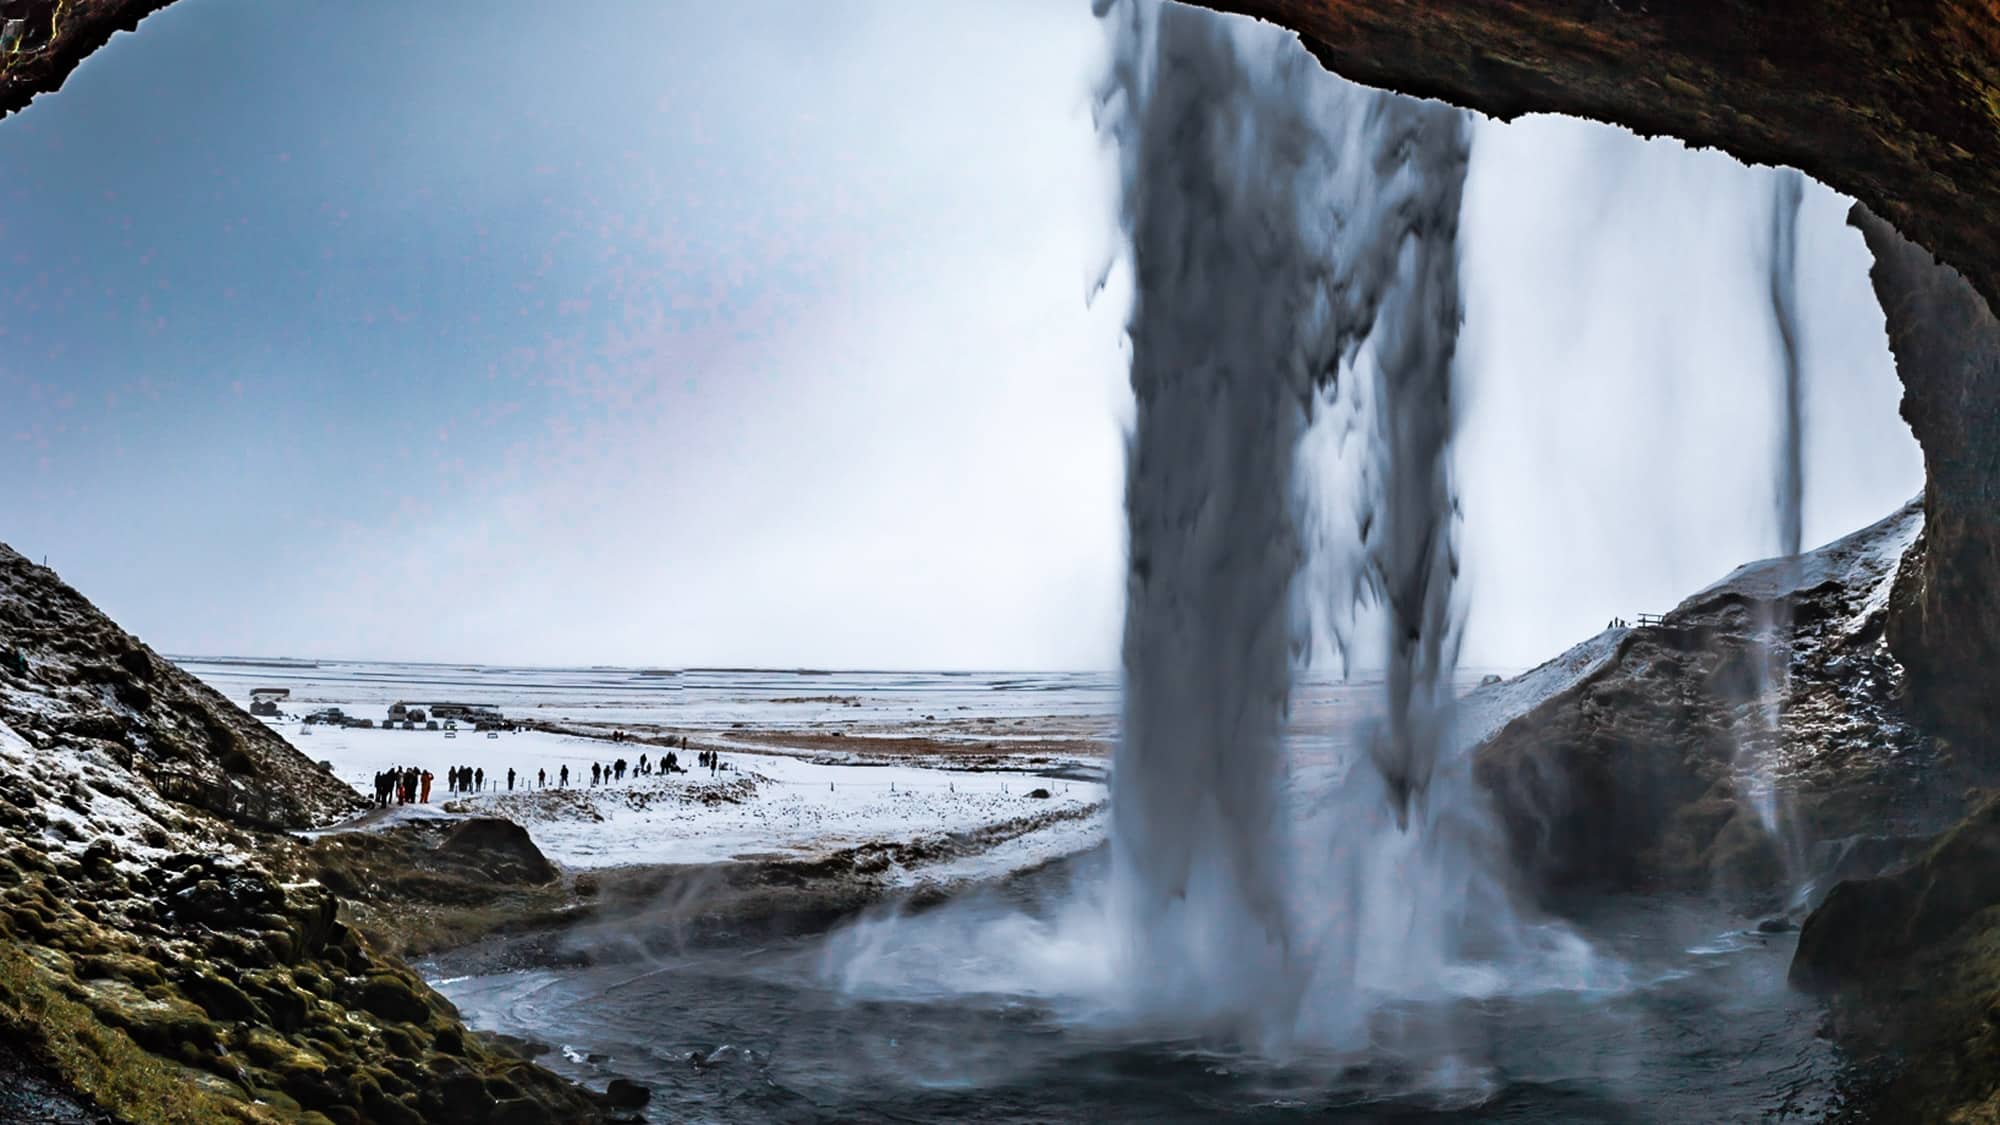 The waterfalls of Iceland make it one of the most beautiful islands in the world